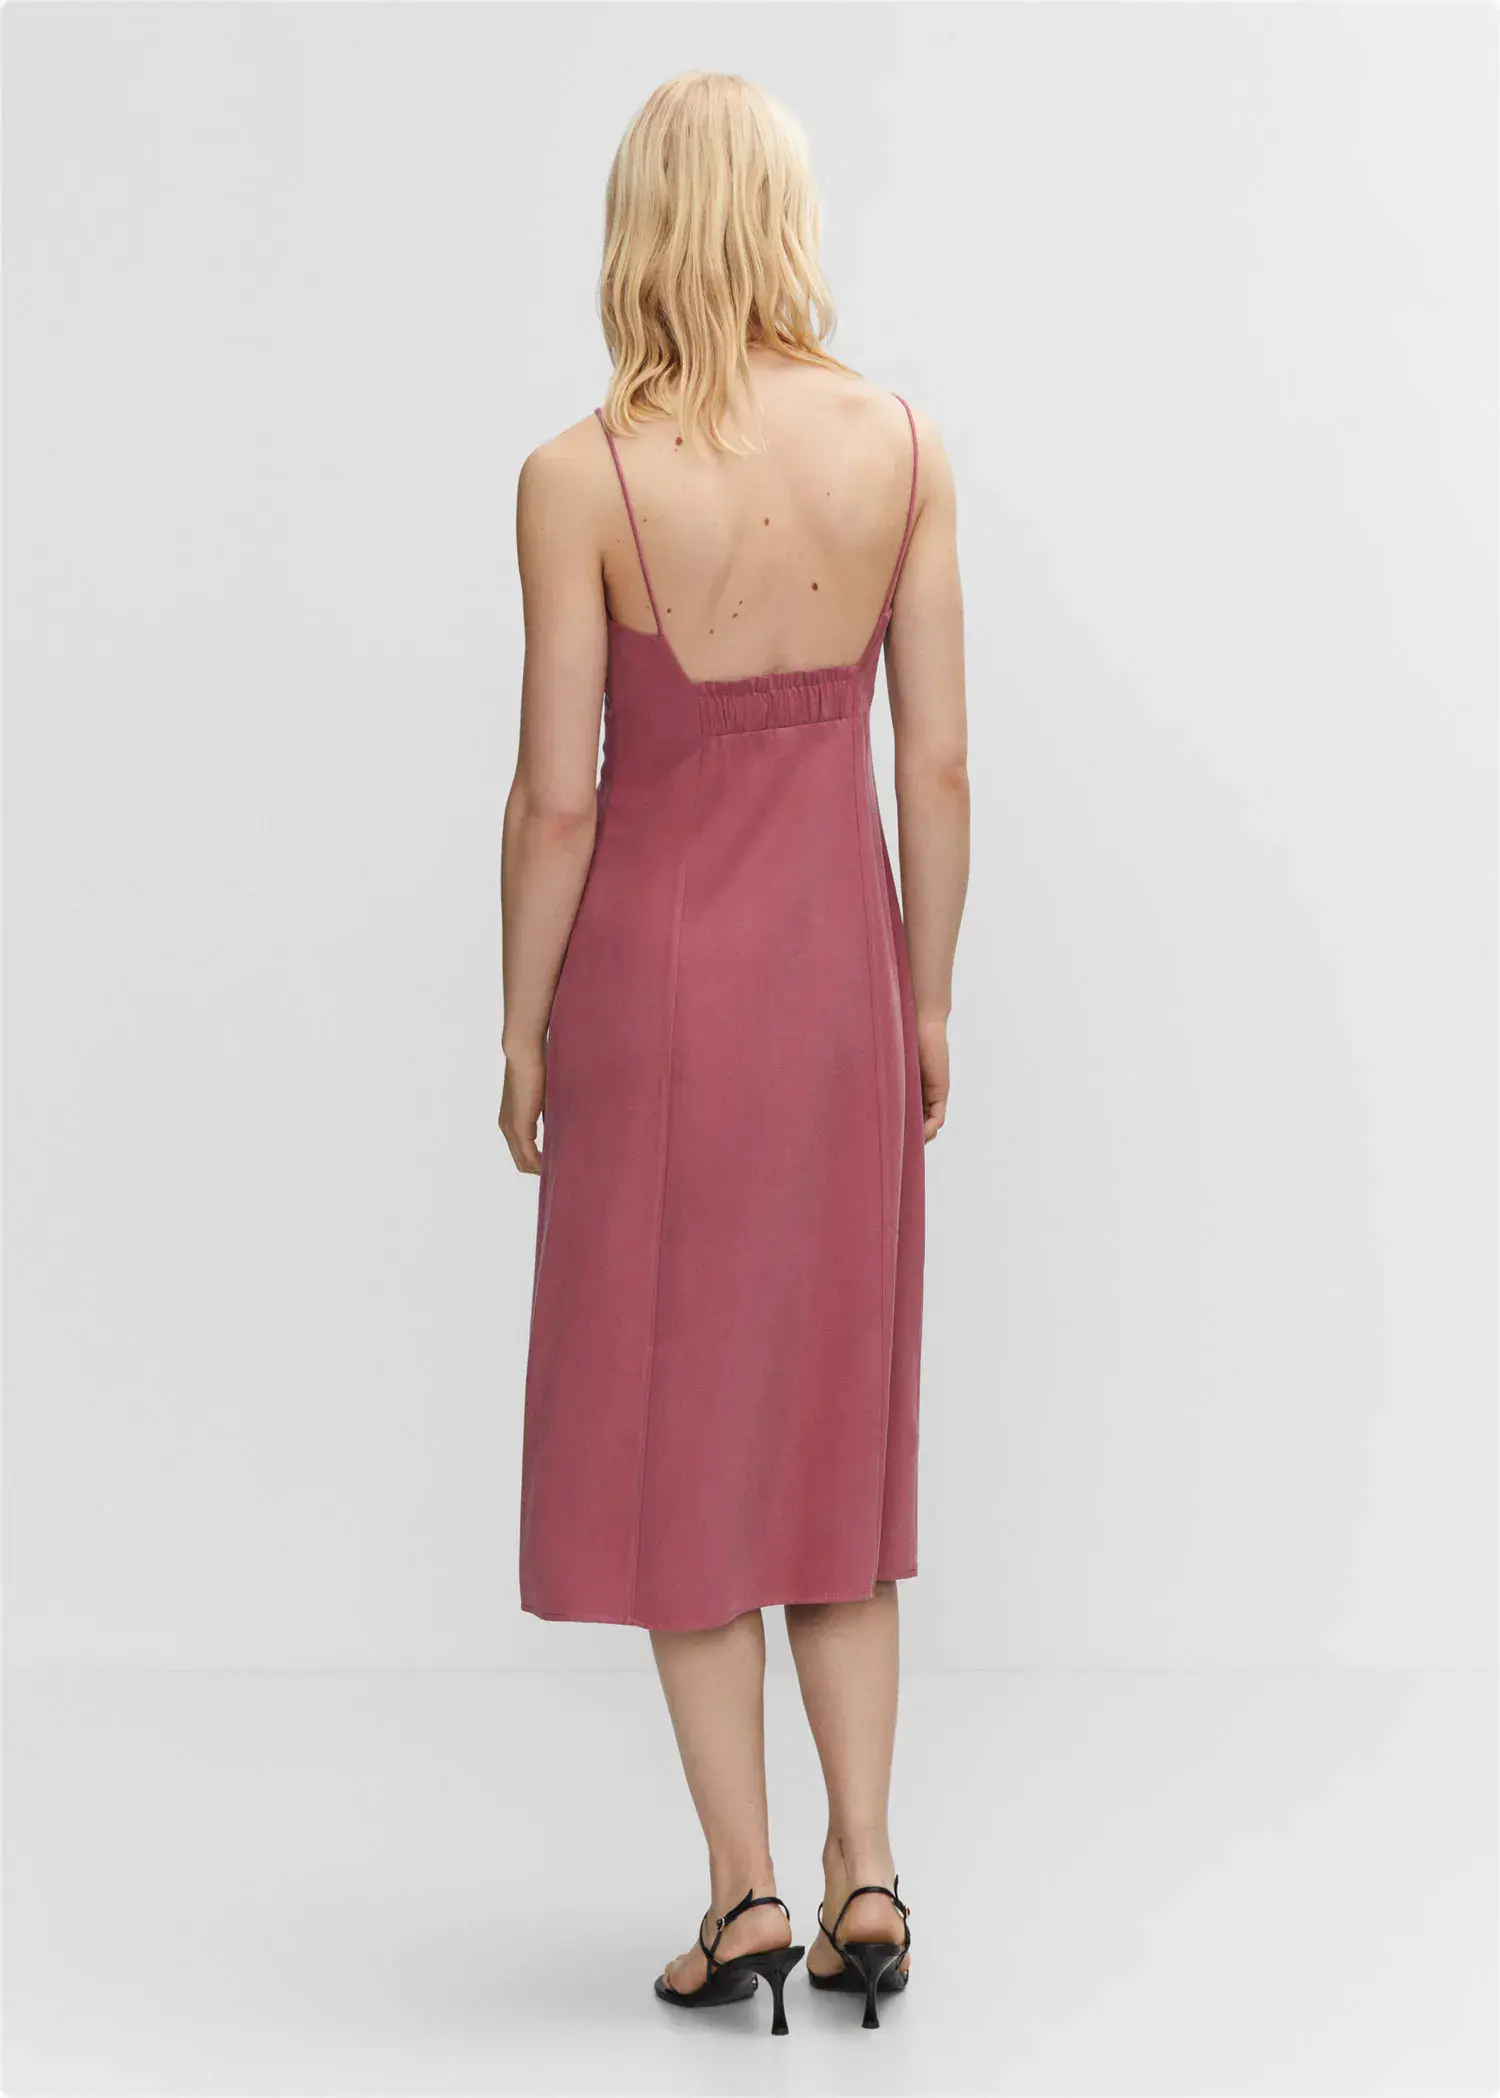 Mango Low-cut midi-dress. a person wearing a pink dress standing in a room. 